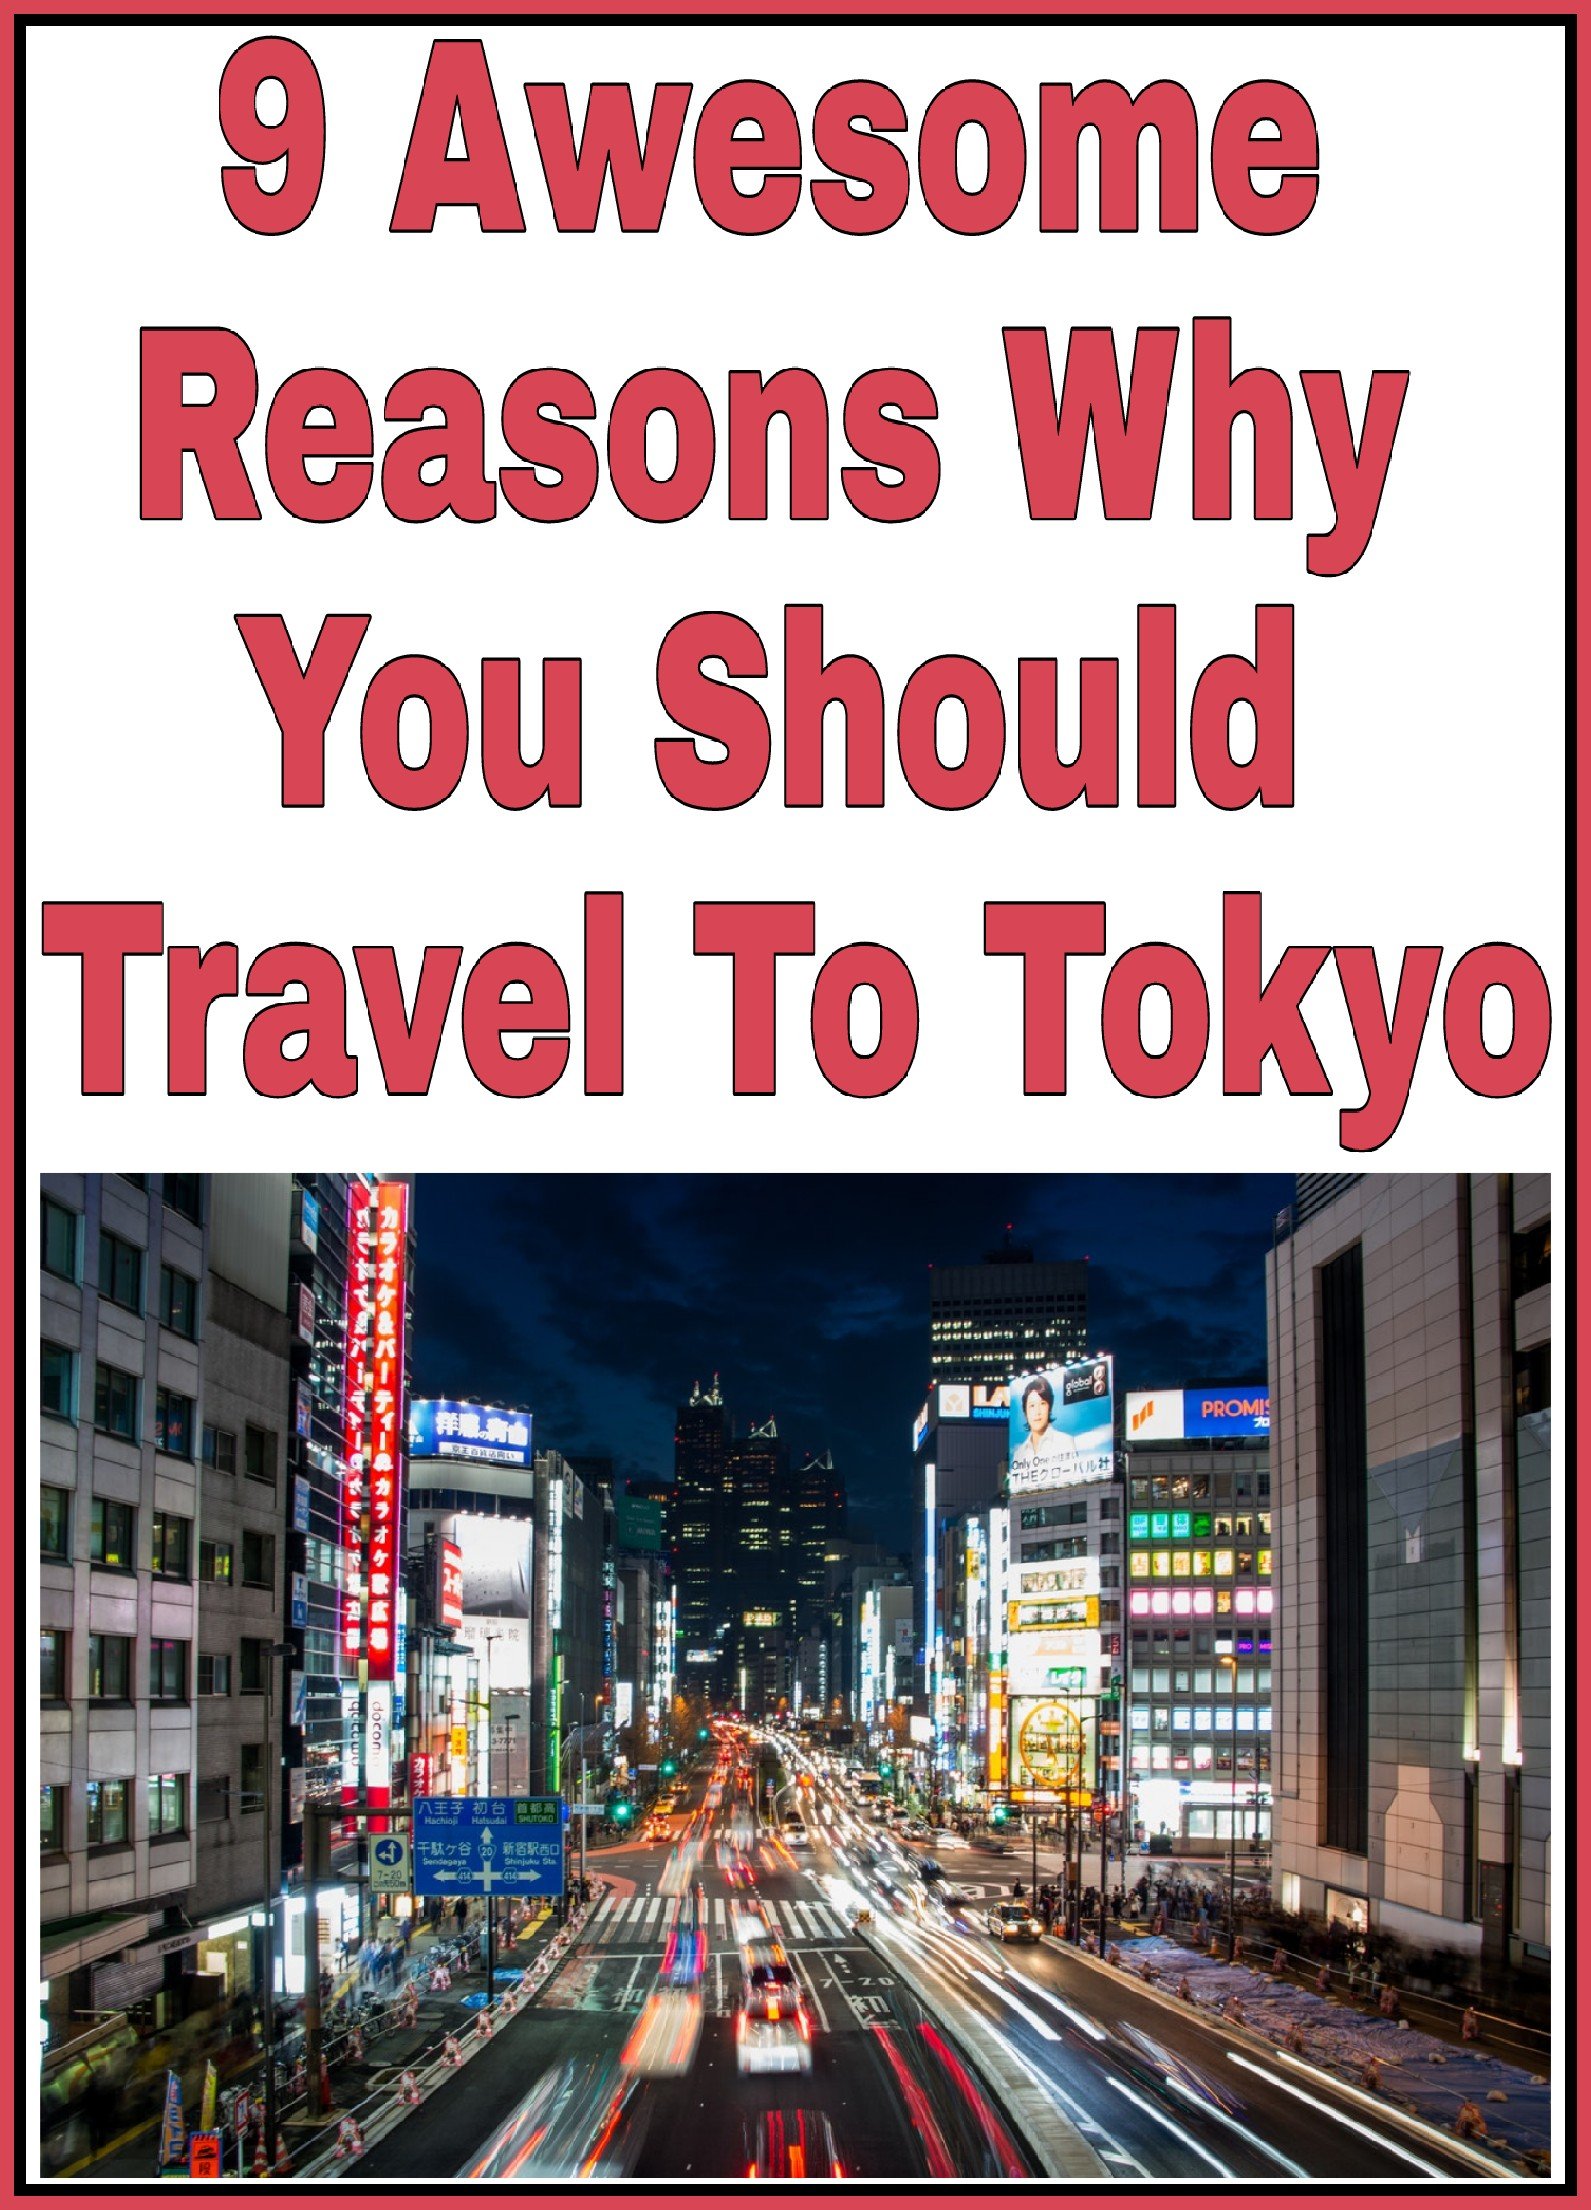 9 Awesome Reasons Why You Should Travel To Tokyo title with an image of Tokyo